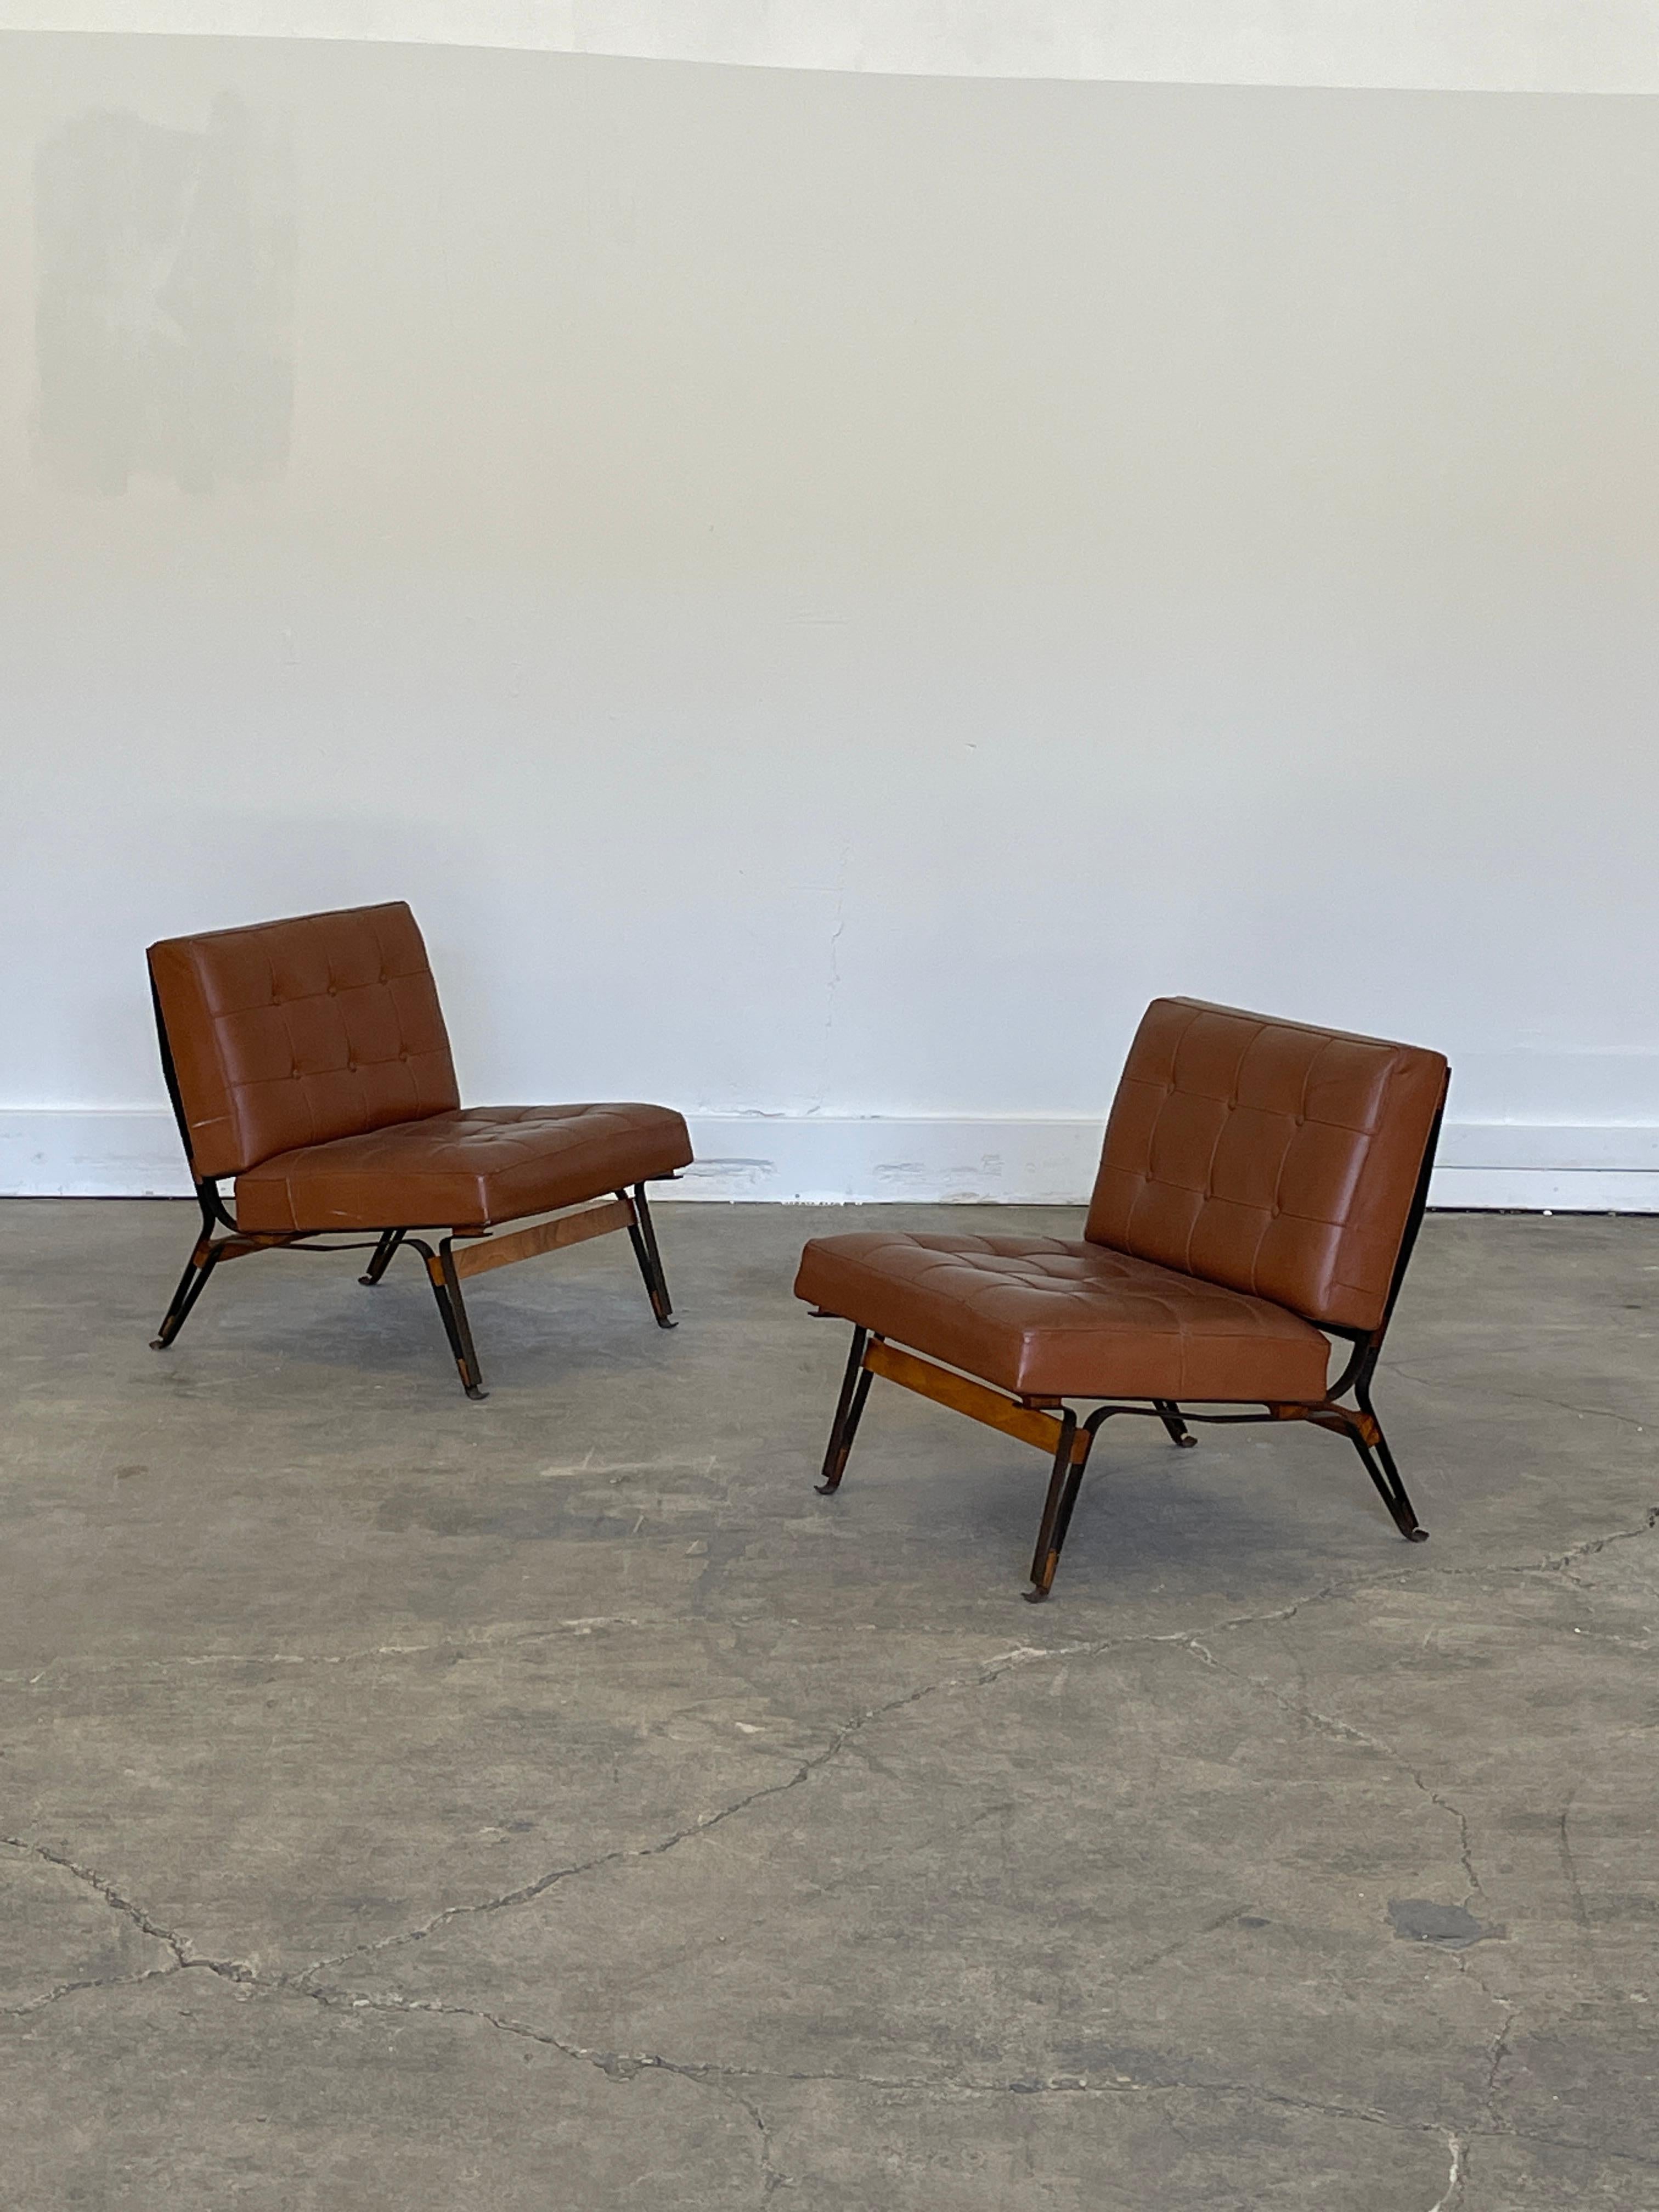 20th Century Model 856 Rare Pair of Matched Leather Lounge Chairs by Ico Parisi, 1950s For Sale